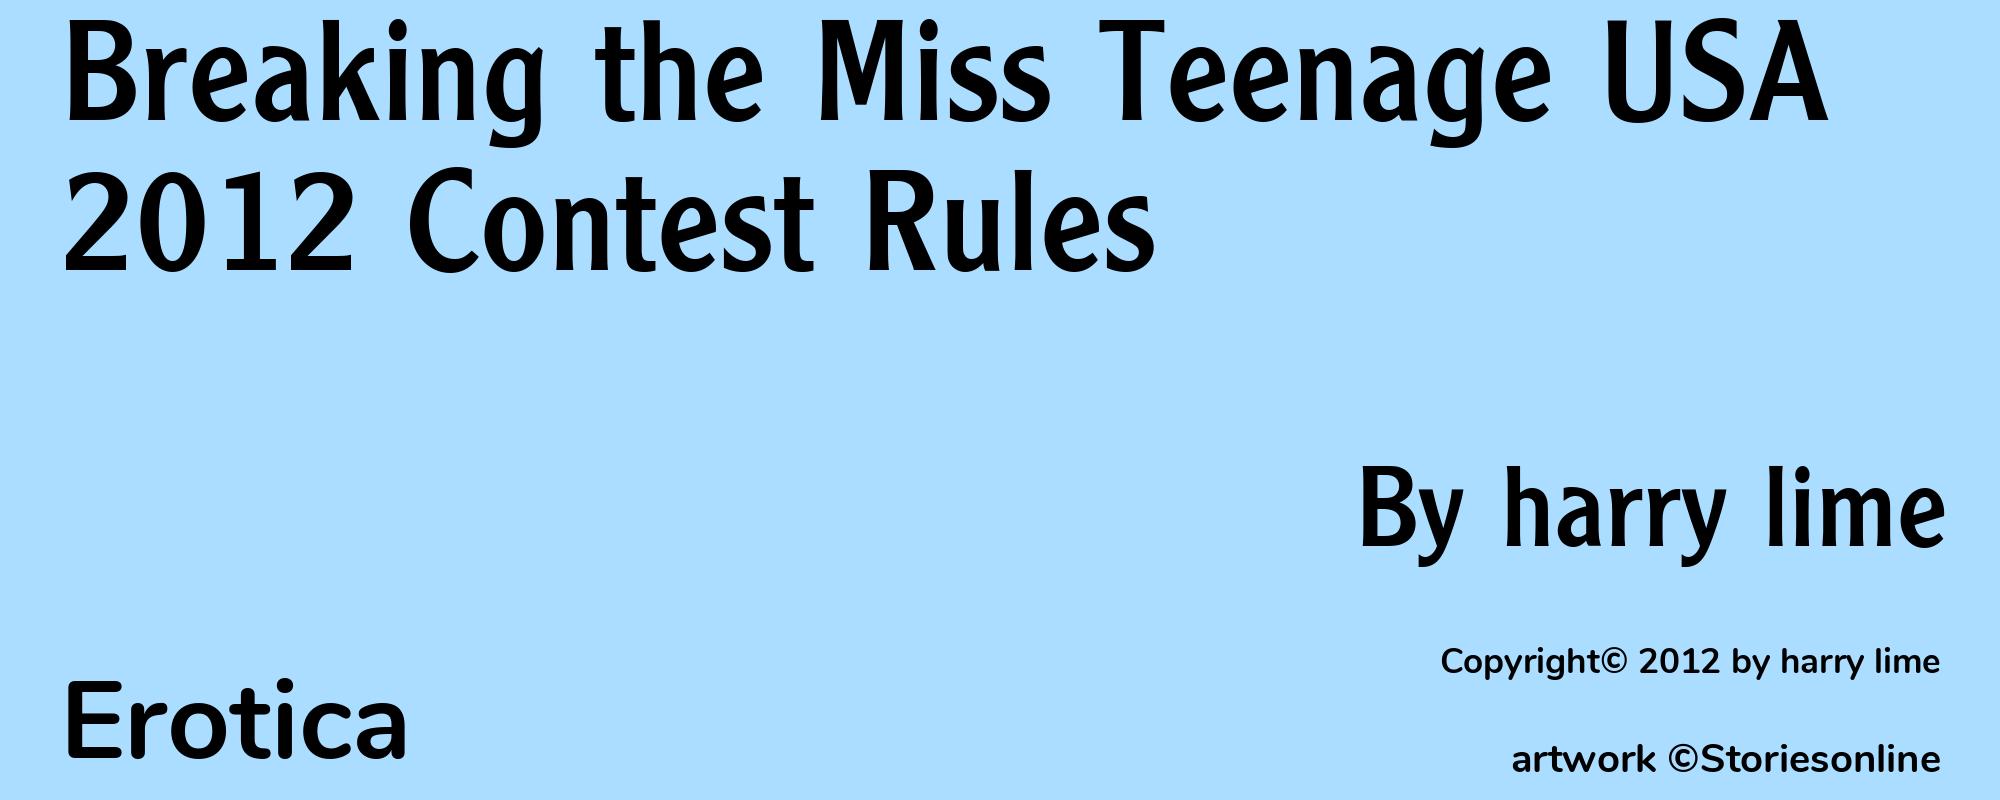 Breaking the Miss Teenage USA 2012 Contest Rules - Cover